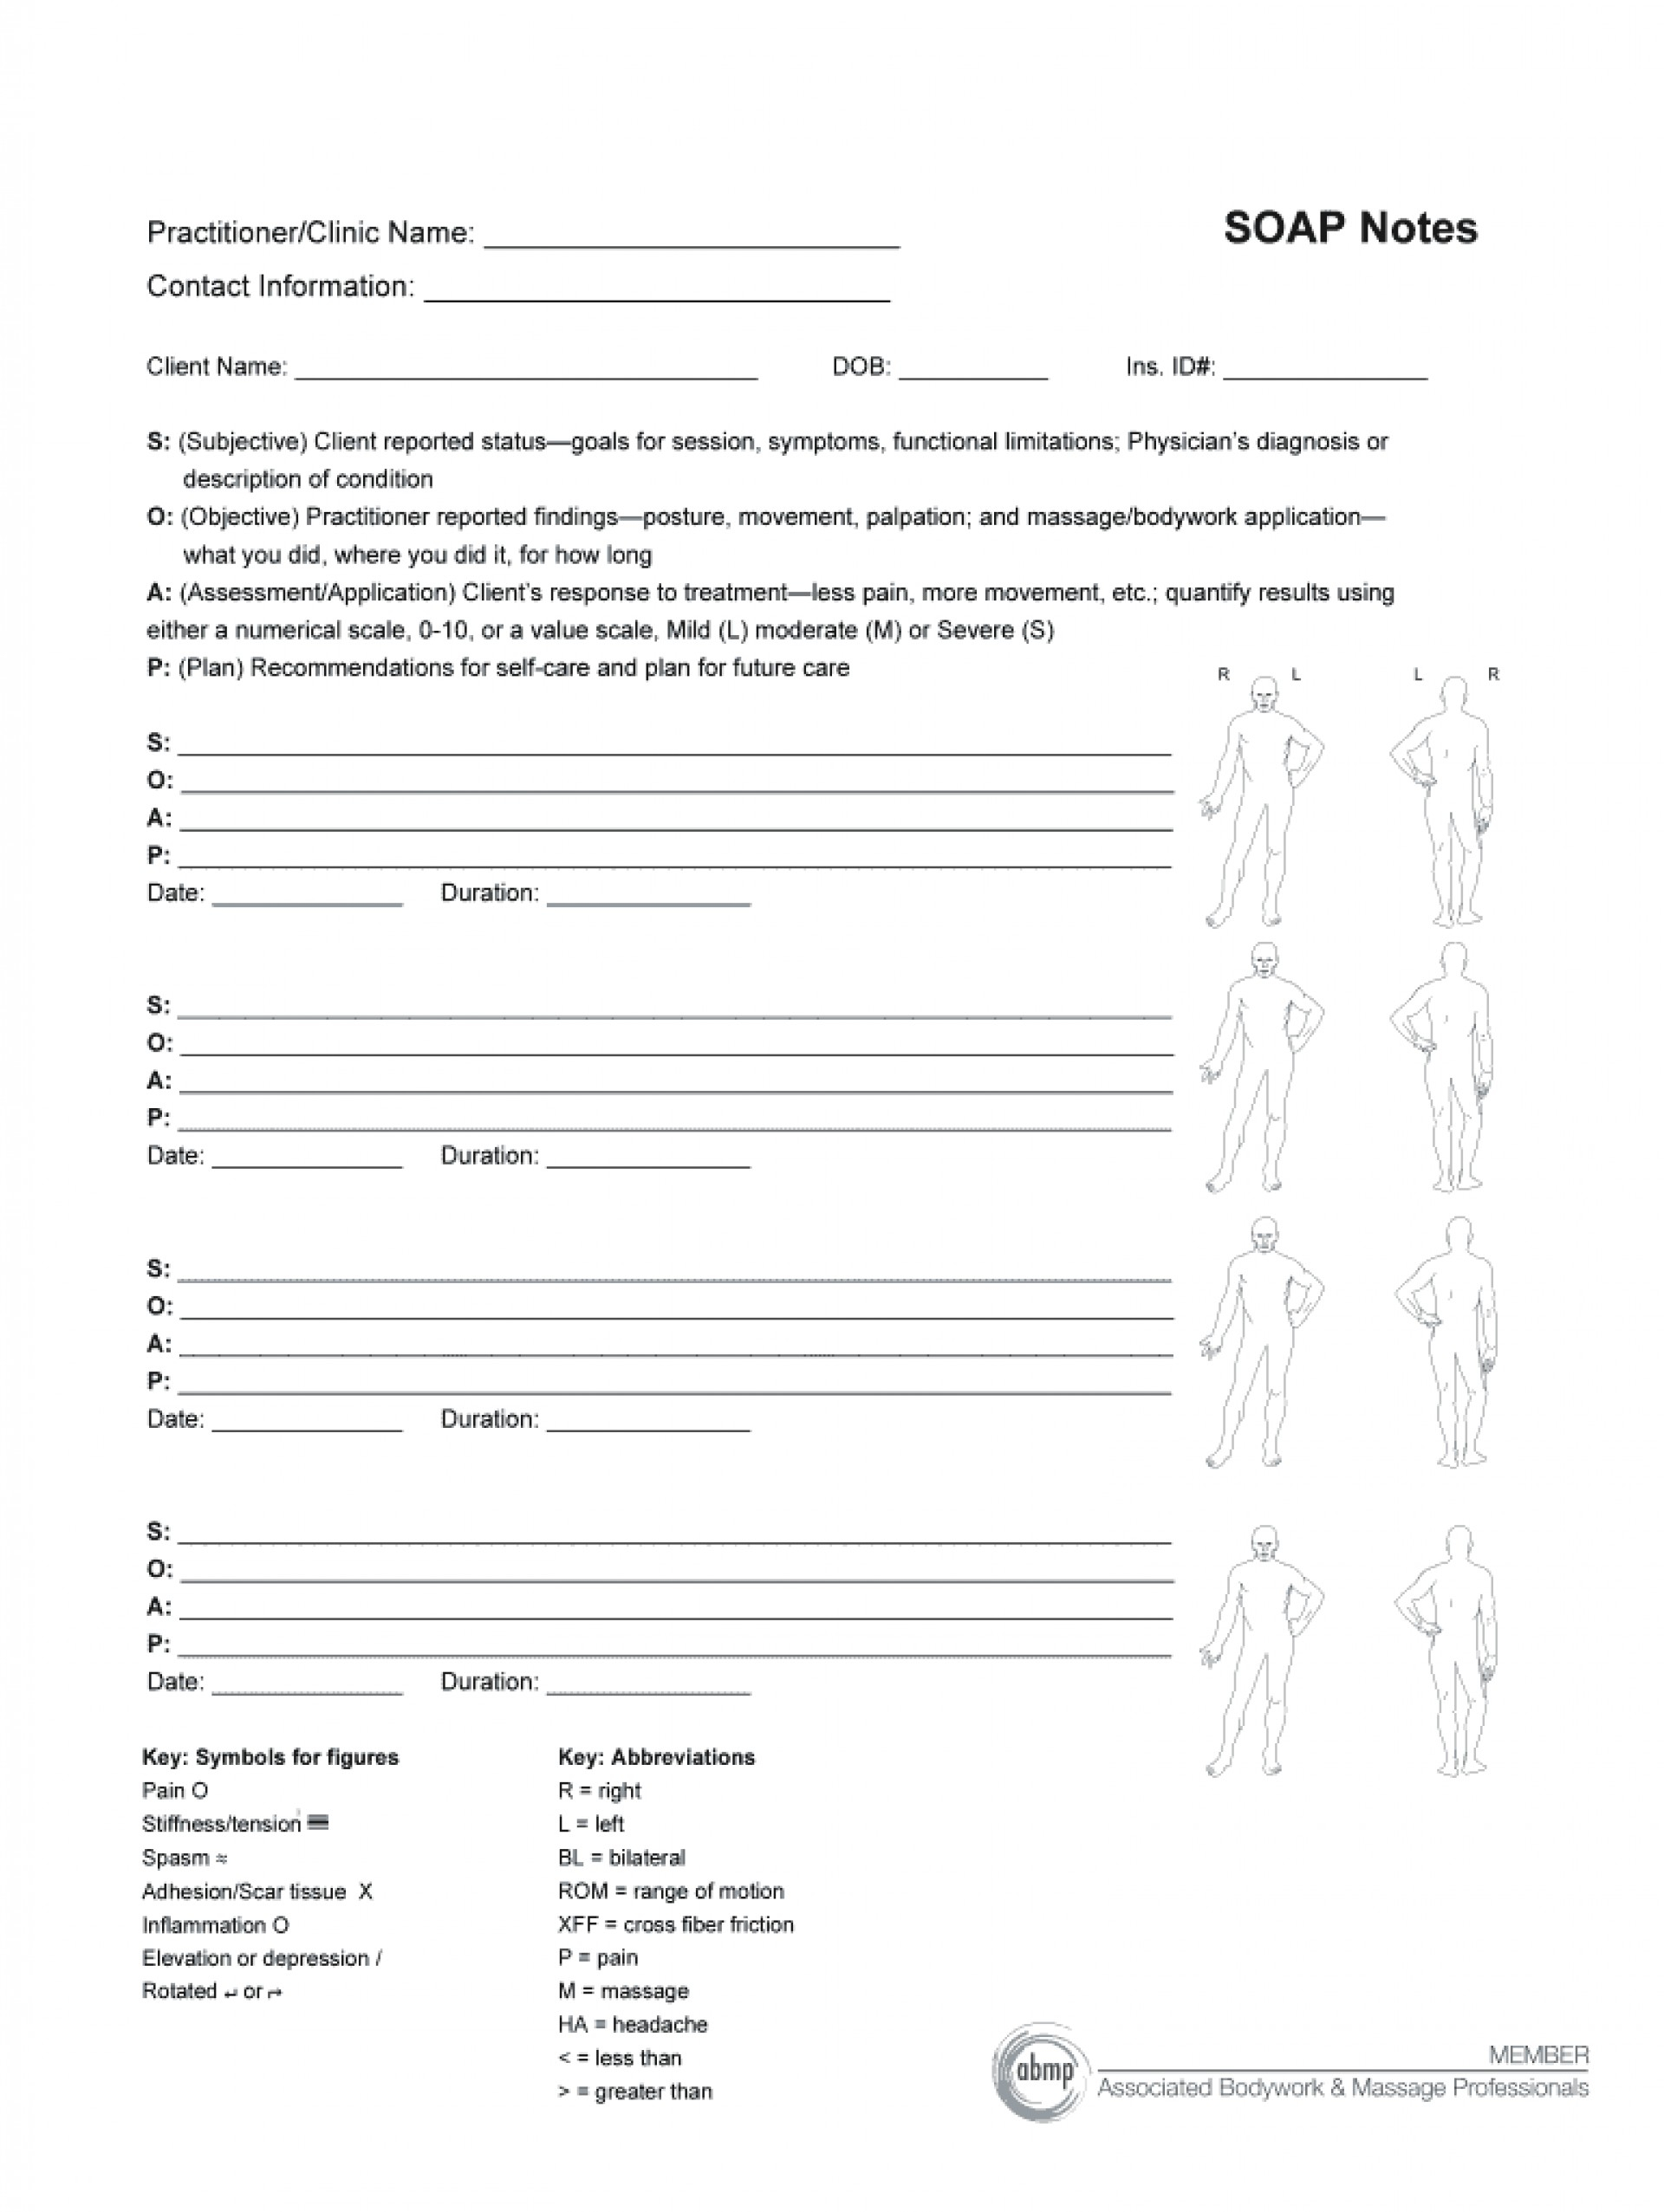 800B Massage Soap Note Template | Wiring Resources With Regard To Free Soap Notes For Massage Therapy Templates